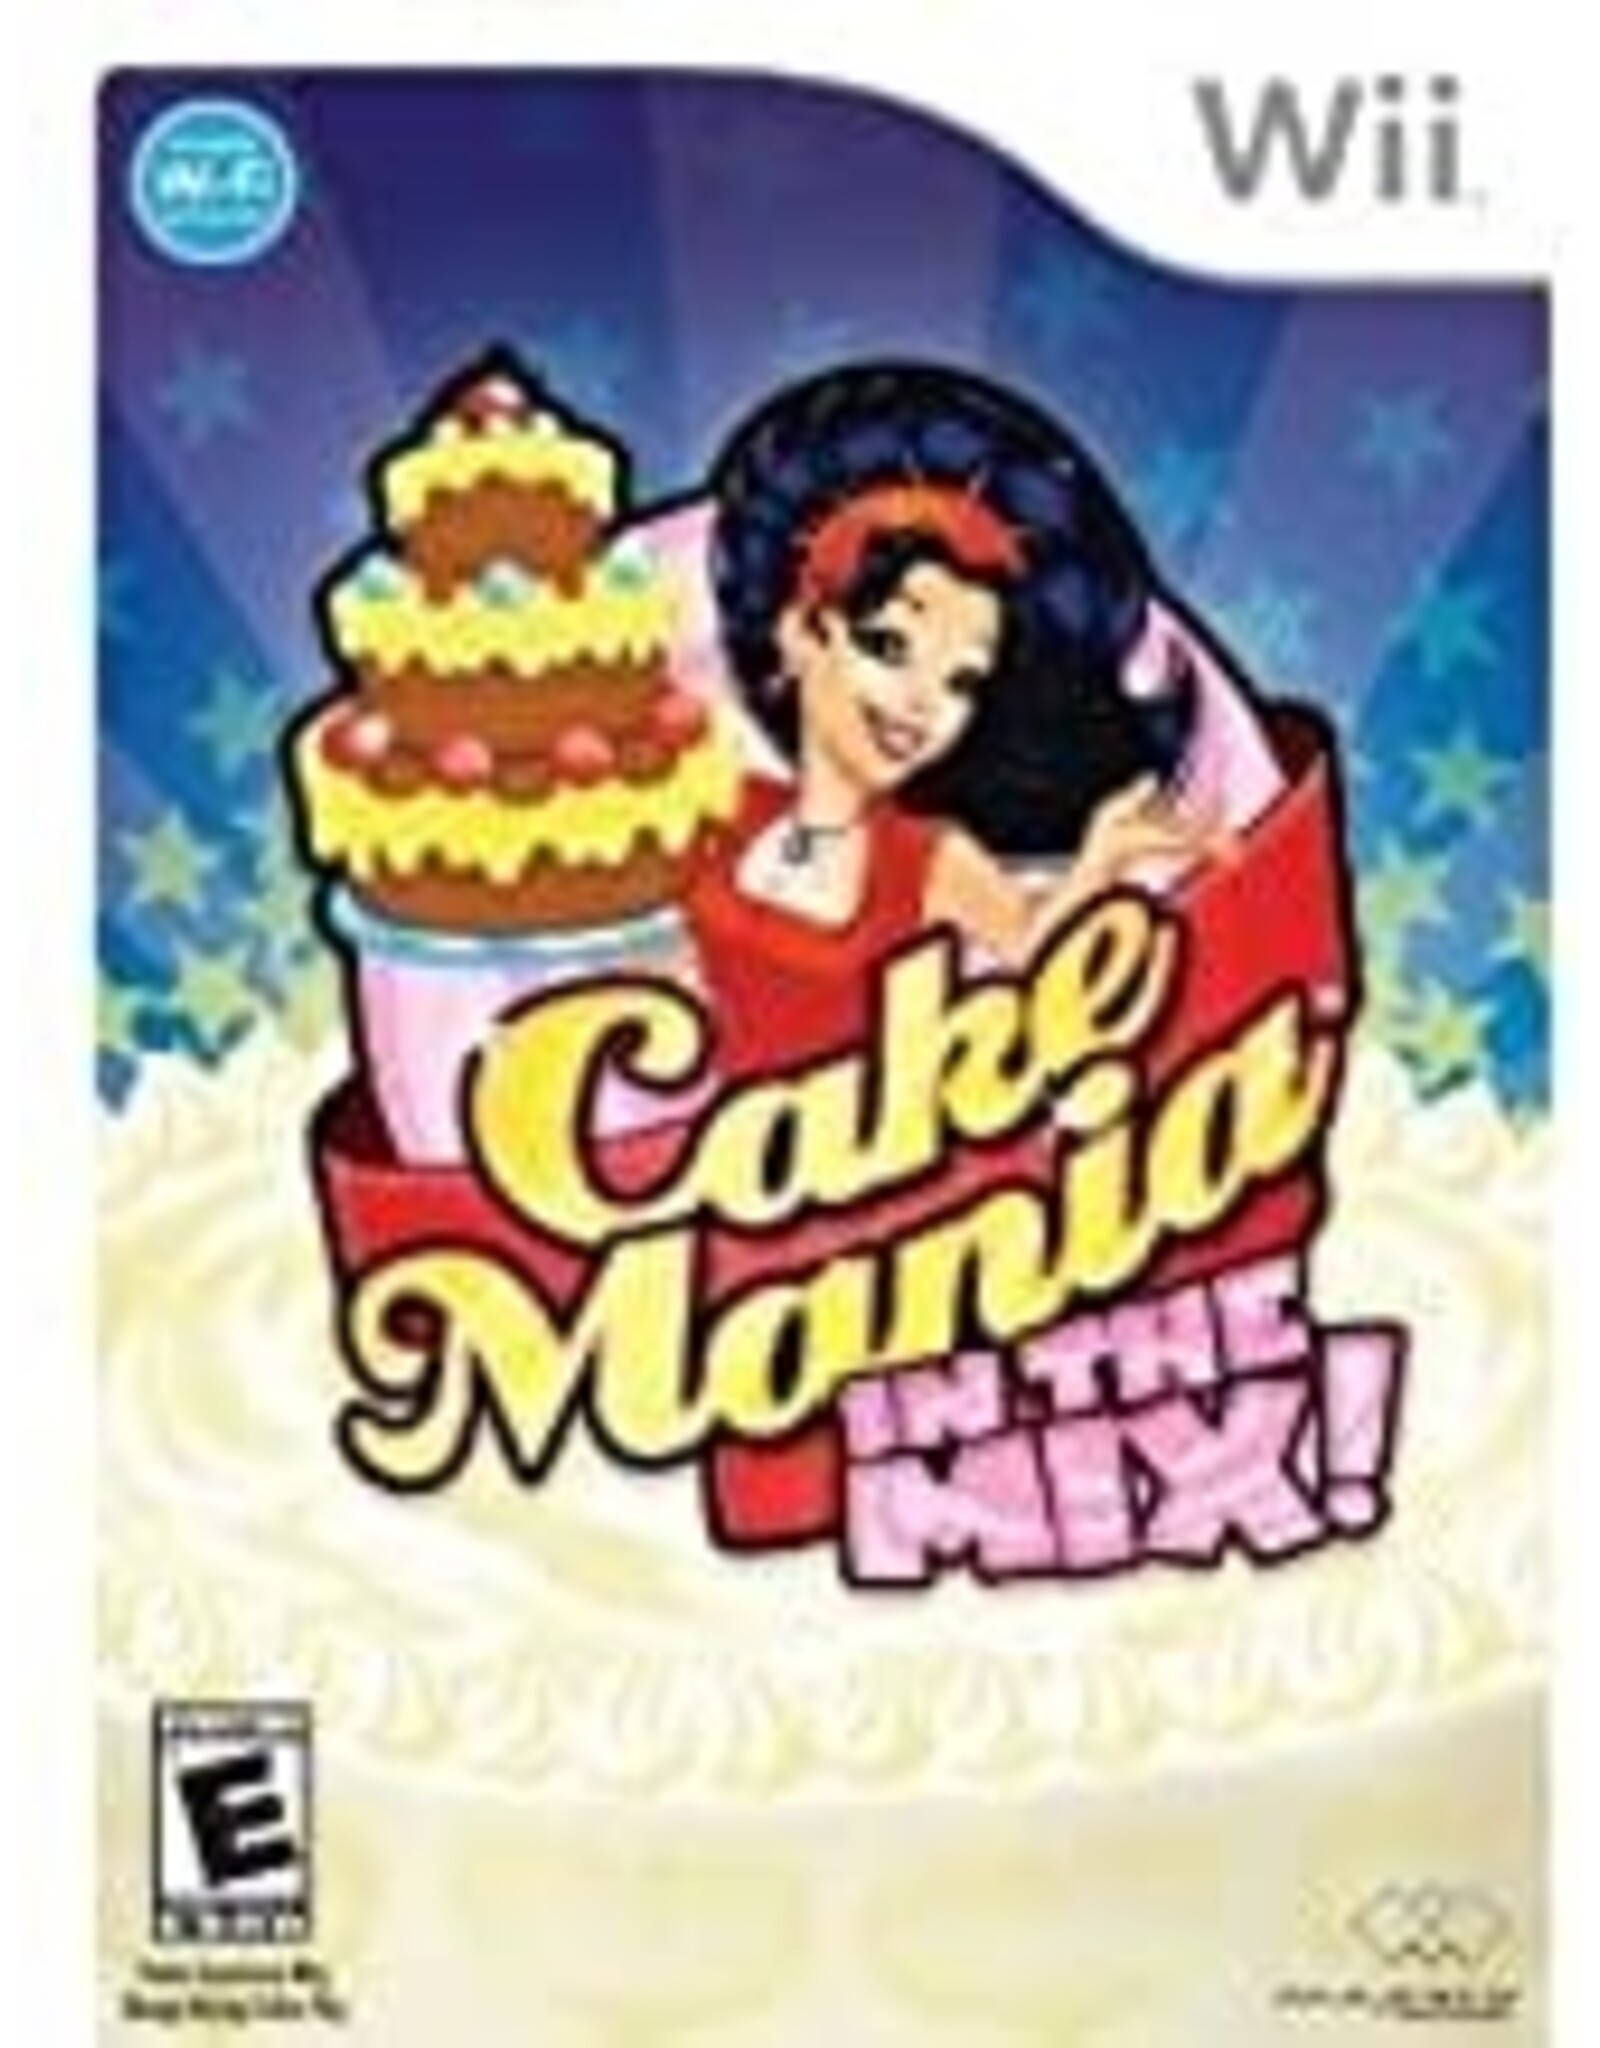 Wii Cake Mania In The Mix (CiB, Damaged Sleeve)